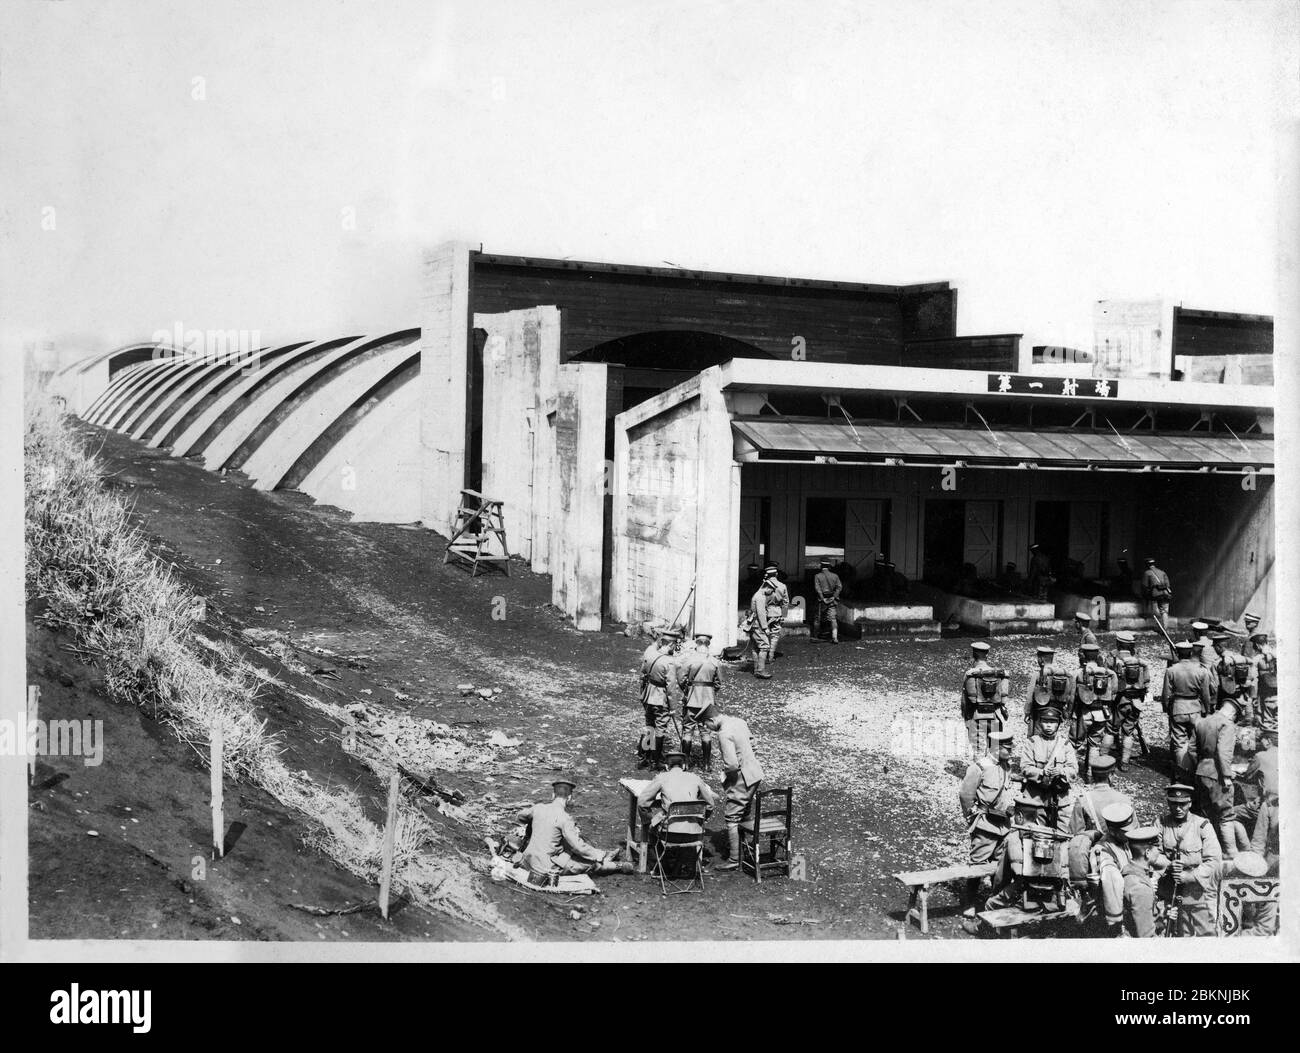 [ 1920s Japan - Japanese Military Firing Range ] —   Soldiers exercising at the Toyama Firing Range (戸山射撃場, Toyama Shagekijo) in Okubo (大久保), Tokyo. It was used by the Imperial Guard.   It consisted of seven 300 meter long reinforced concrete buildings into which soldiers shot their automatic and other weapons.  From a private photo album of a member of the Japanese Imperial Guard (Konoe Shidan) who served between 1928 (Showa 3) and 1930 (Showa 5).  20th century gelatin silver print. Stock Photo